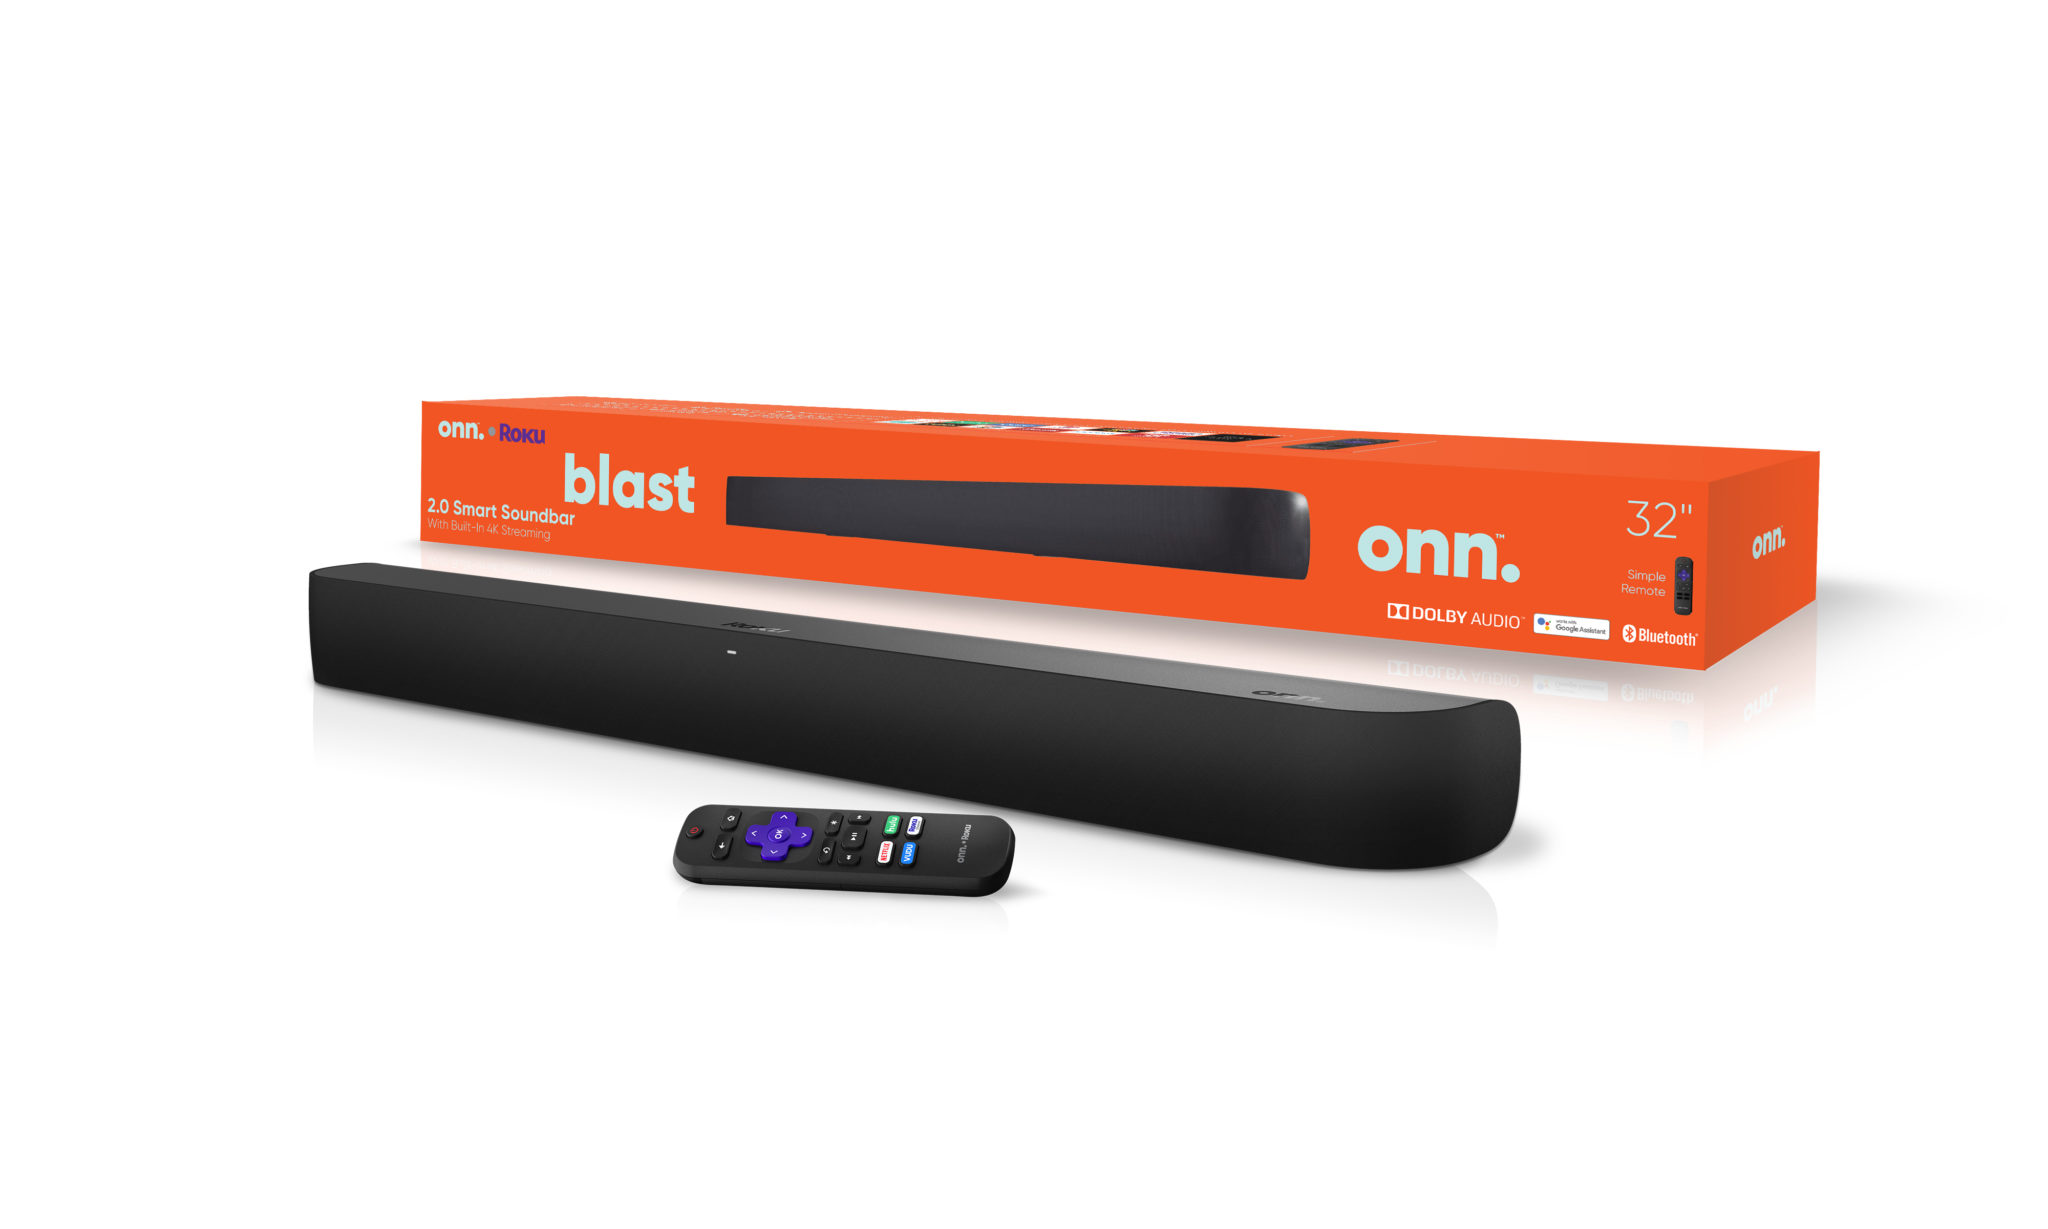 The New Onn Roku Smart Soundbar From Walmart is Now Available in Stores & Online